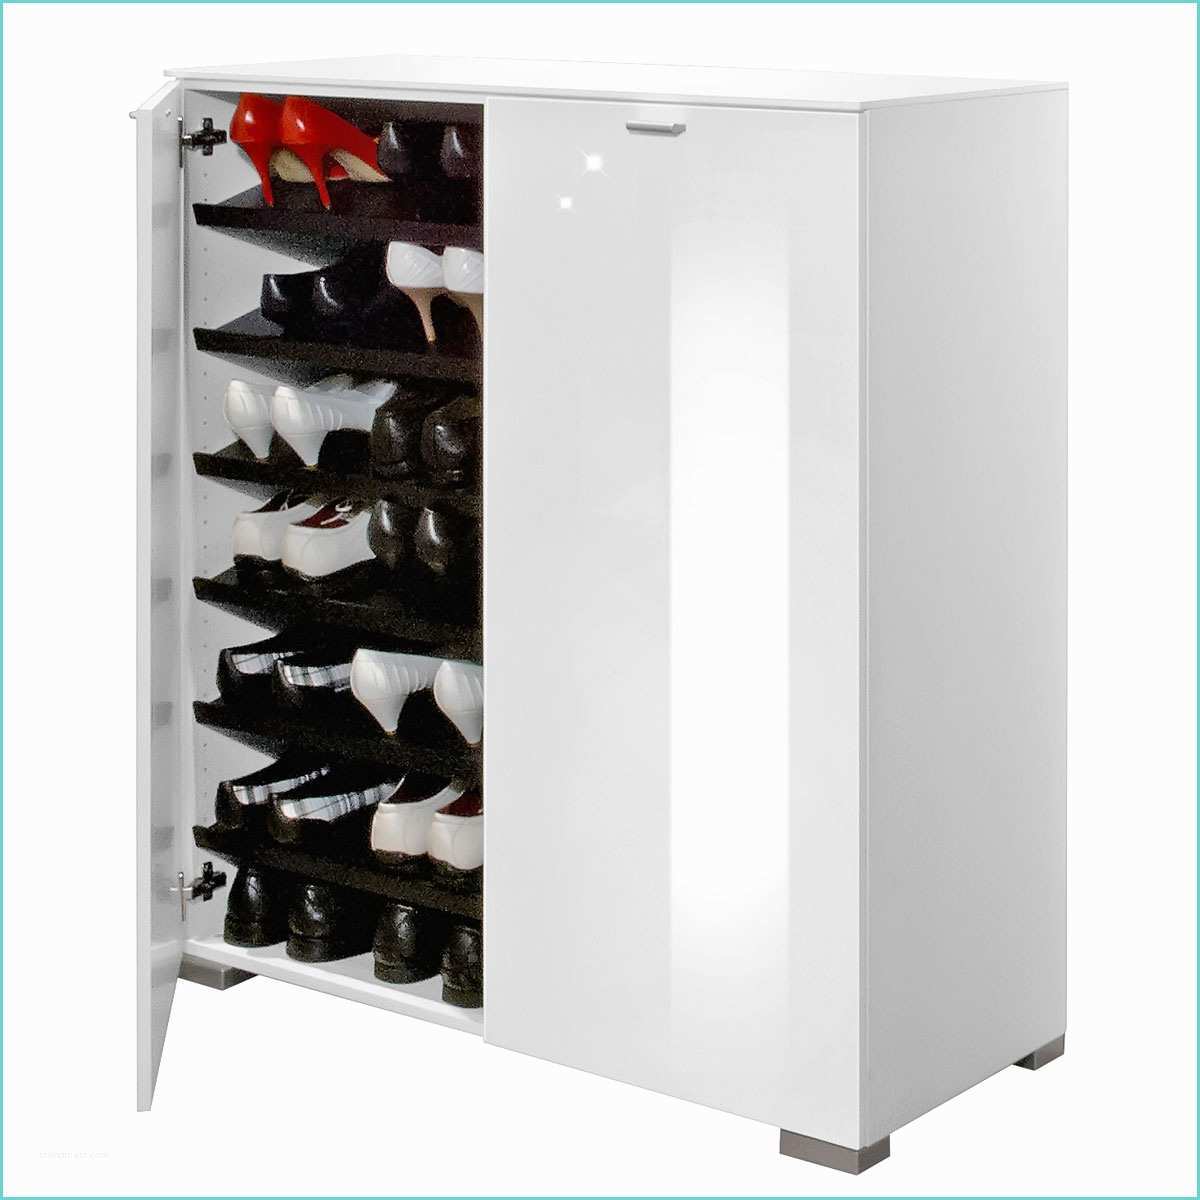 Meuble A Chaussure Armoire La Redoute Meuble Chaussure